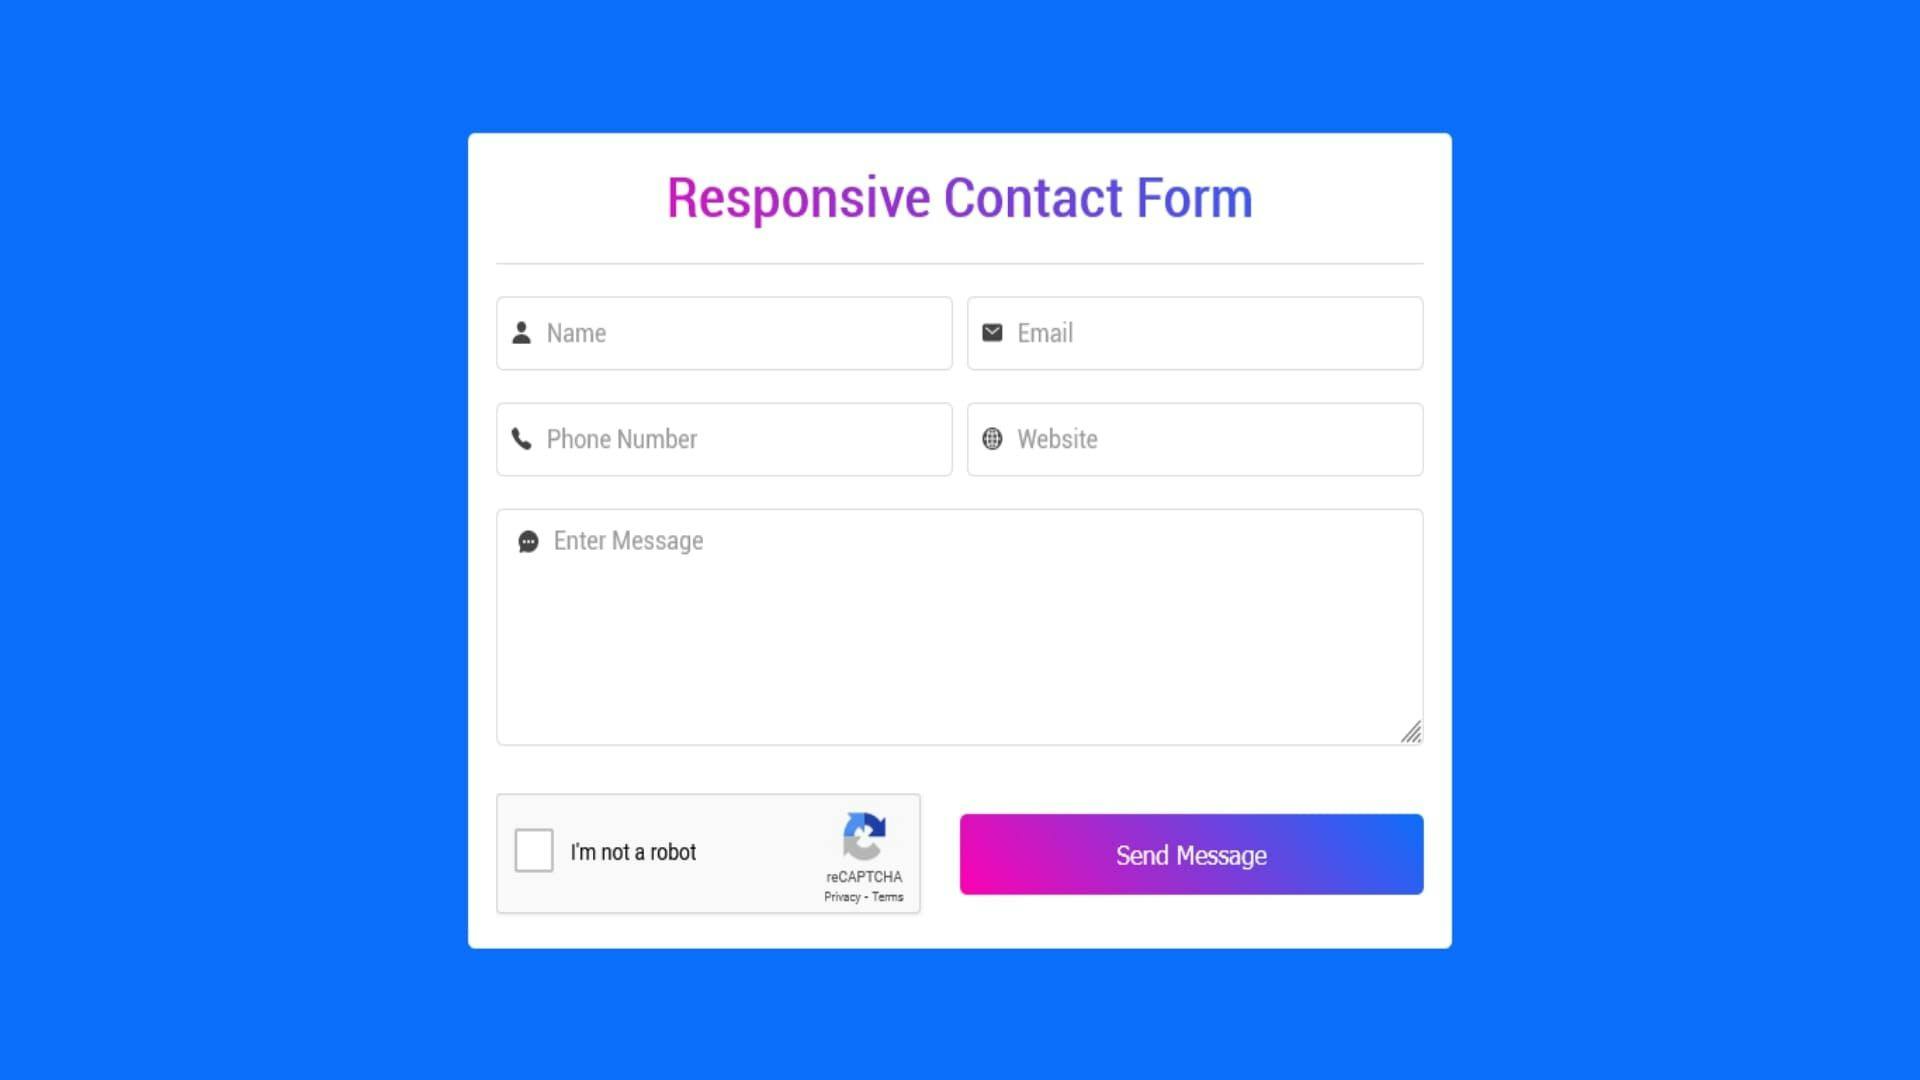 Responsive Contact Form with recaptcha using HTML and CSS only